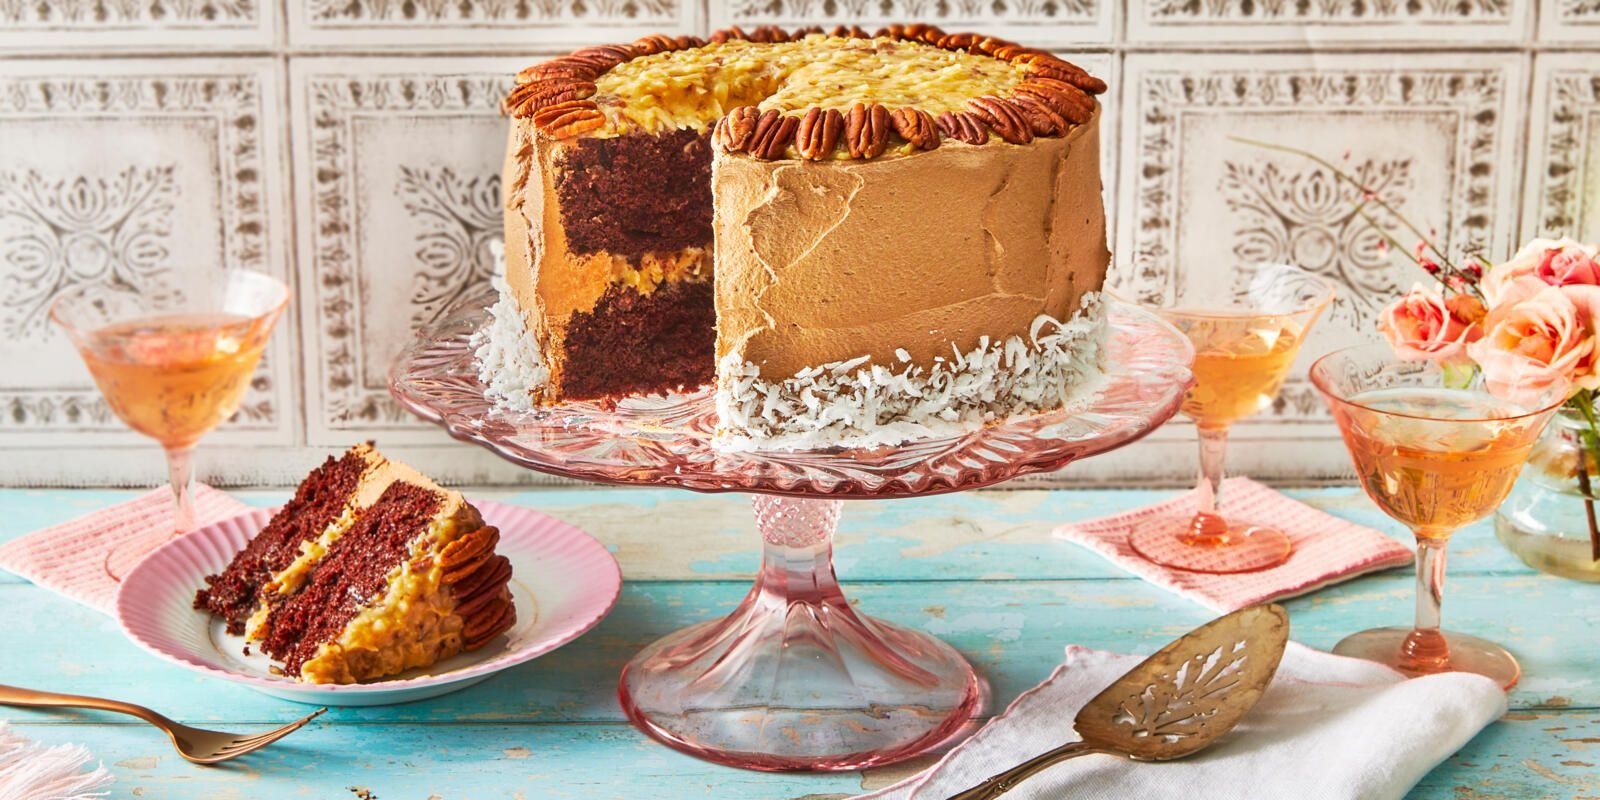 Mother's Day Cake Recipes